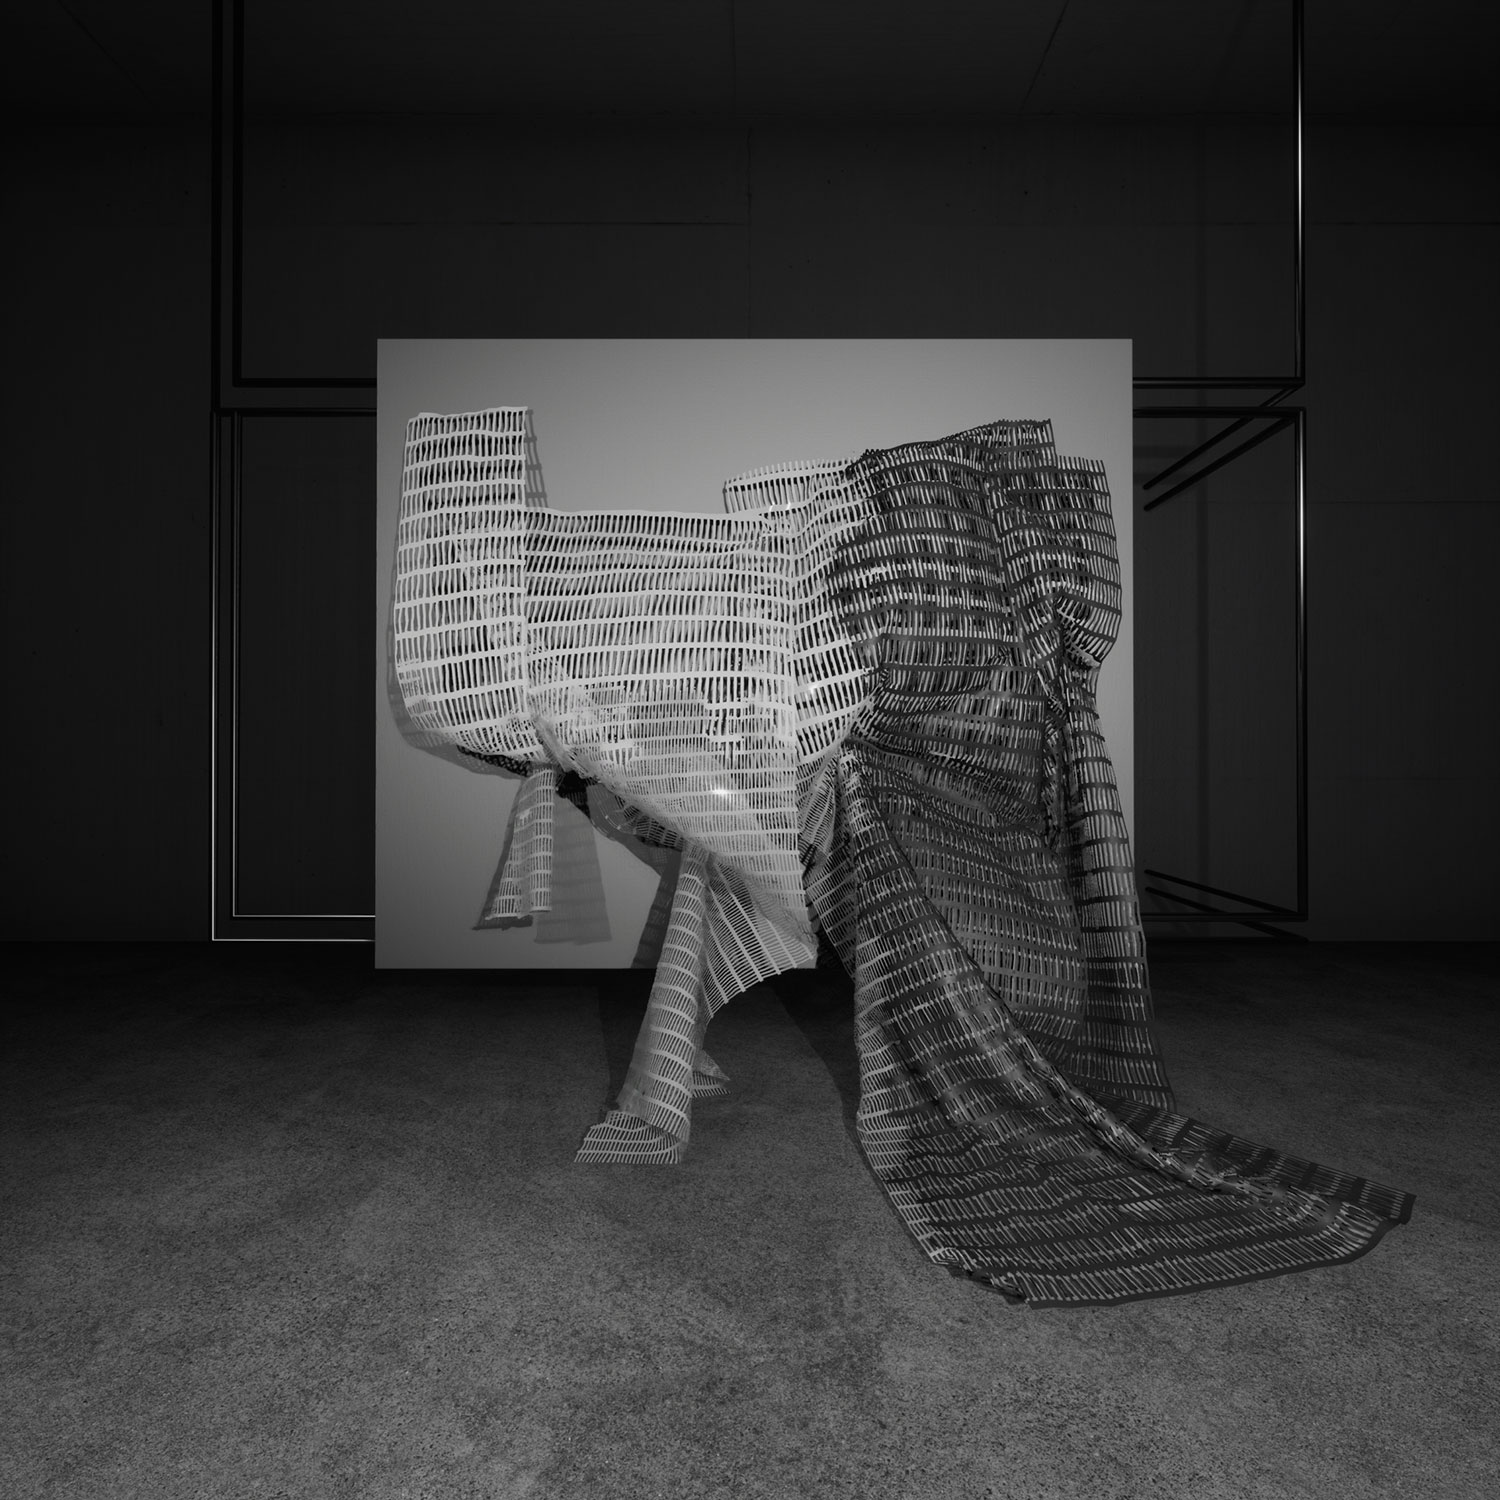 Lines and Patterns (Painting Composition), Video Still, 2021, Claudia Brăileanu